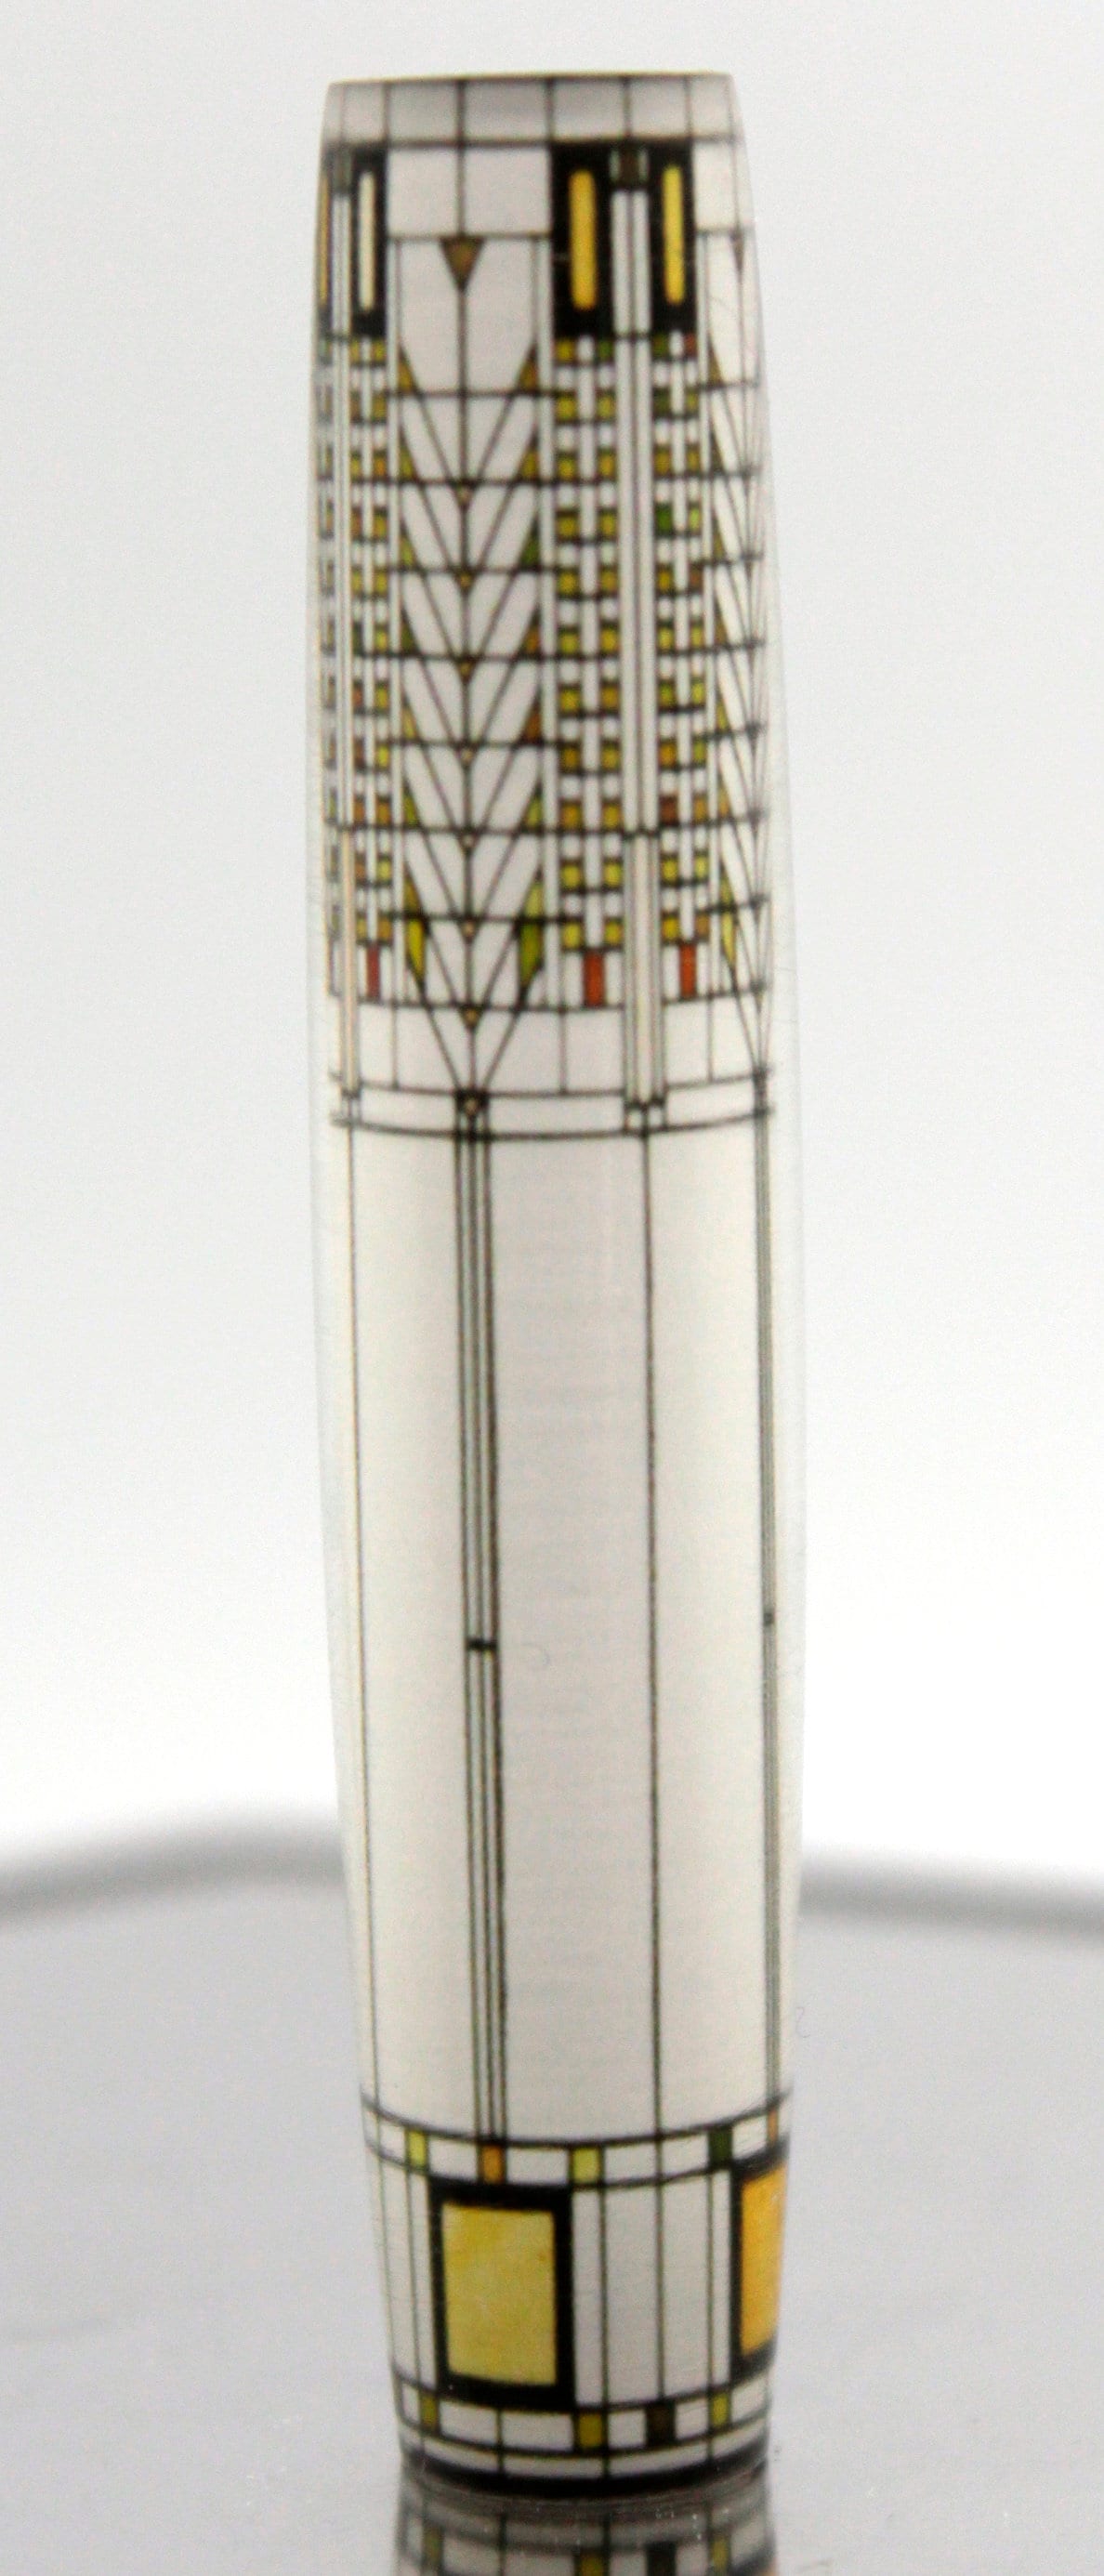 Frank Lloyd Wright - Tree of Life Stained Glass from Darwin D. Martin House Resin Cast Pen Blank for the Editor Pen Kit